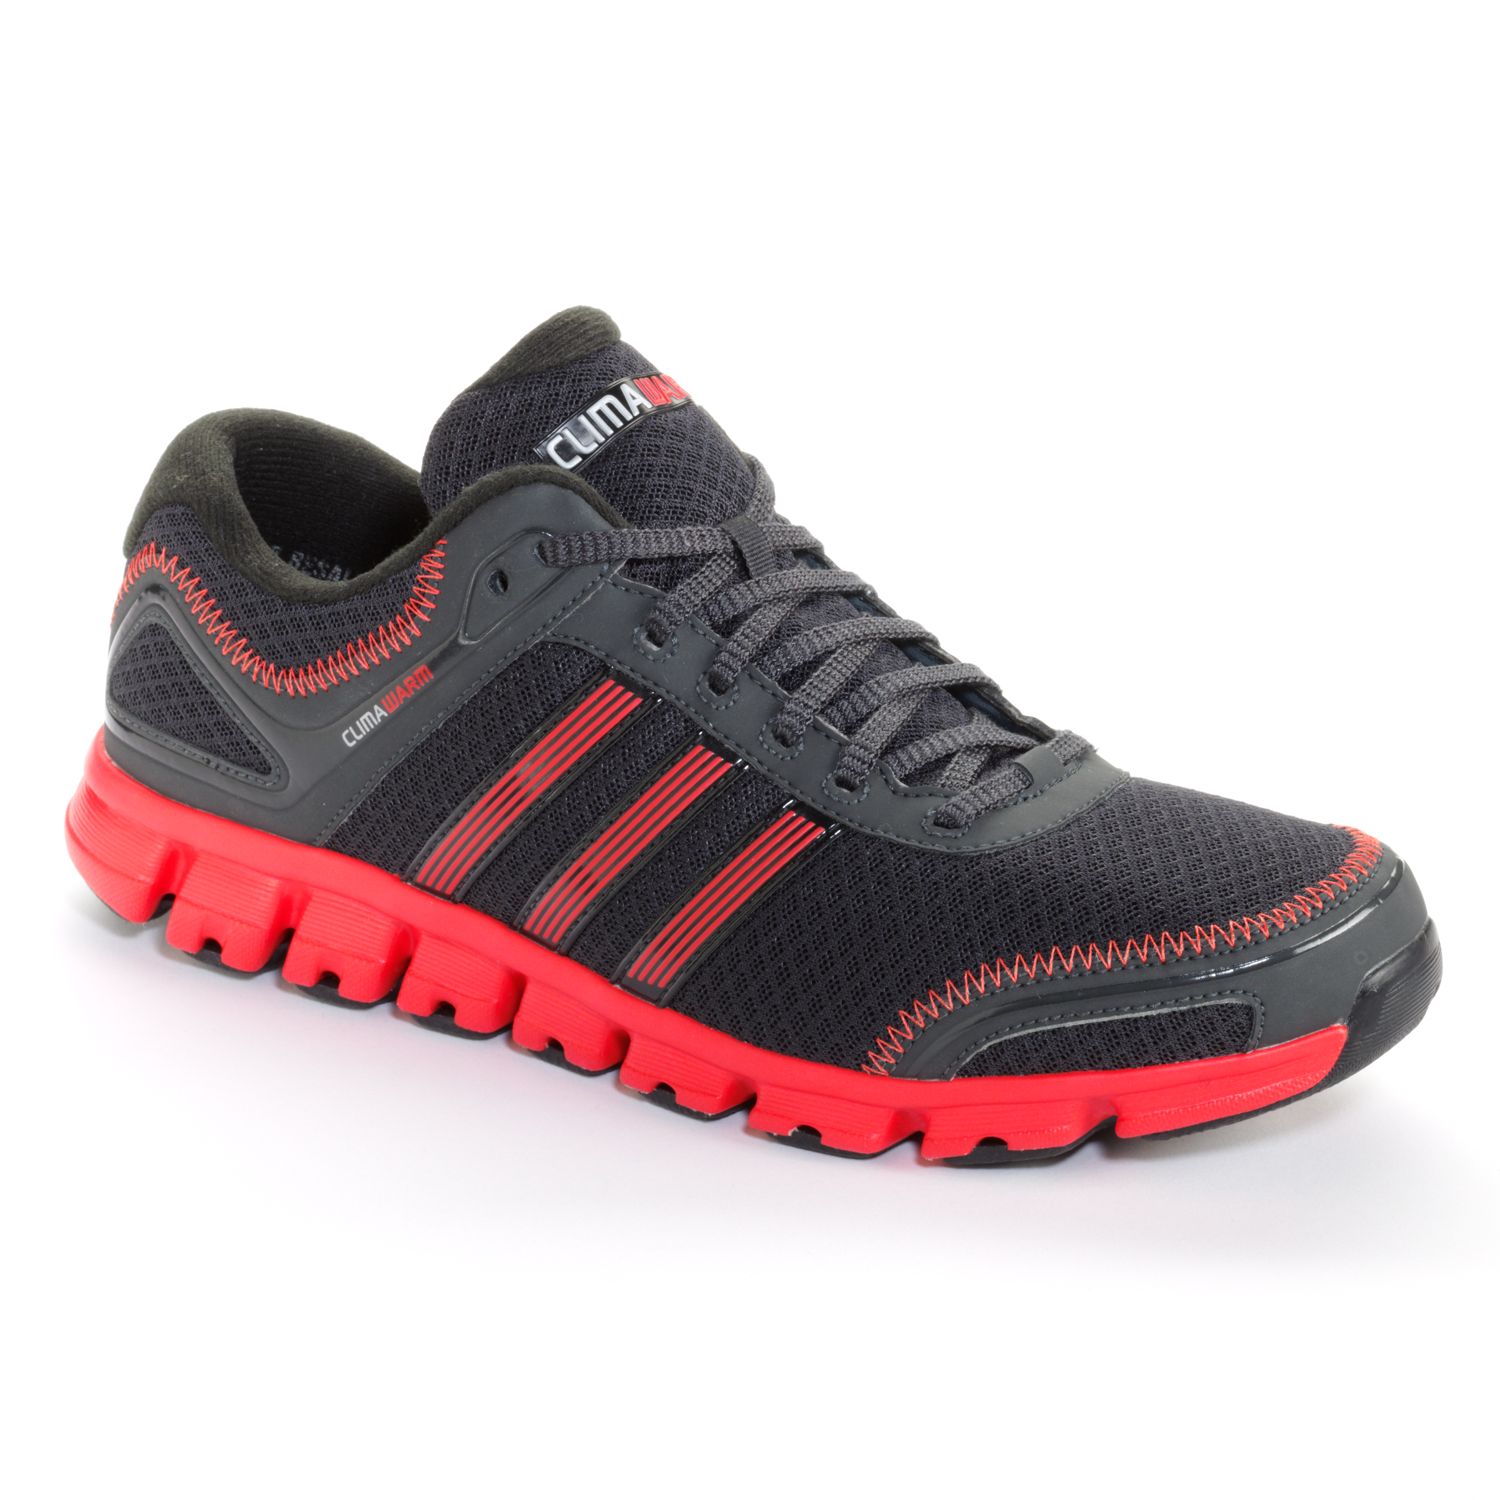 adidas climawarm shoes womens